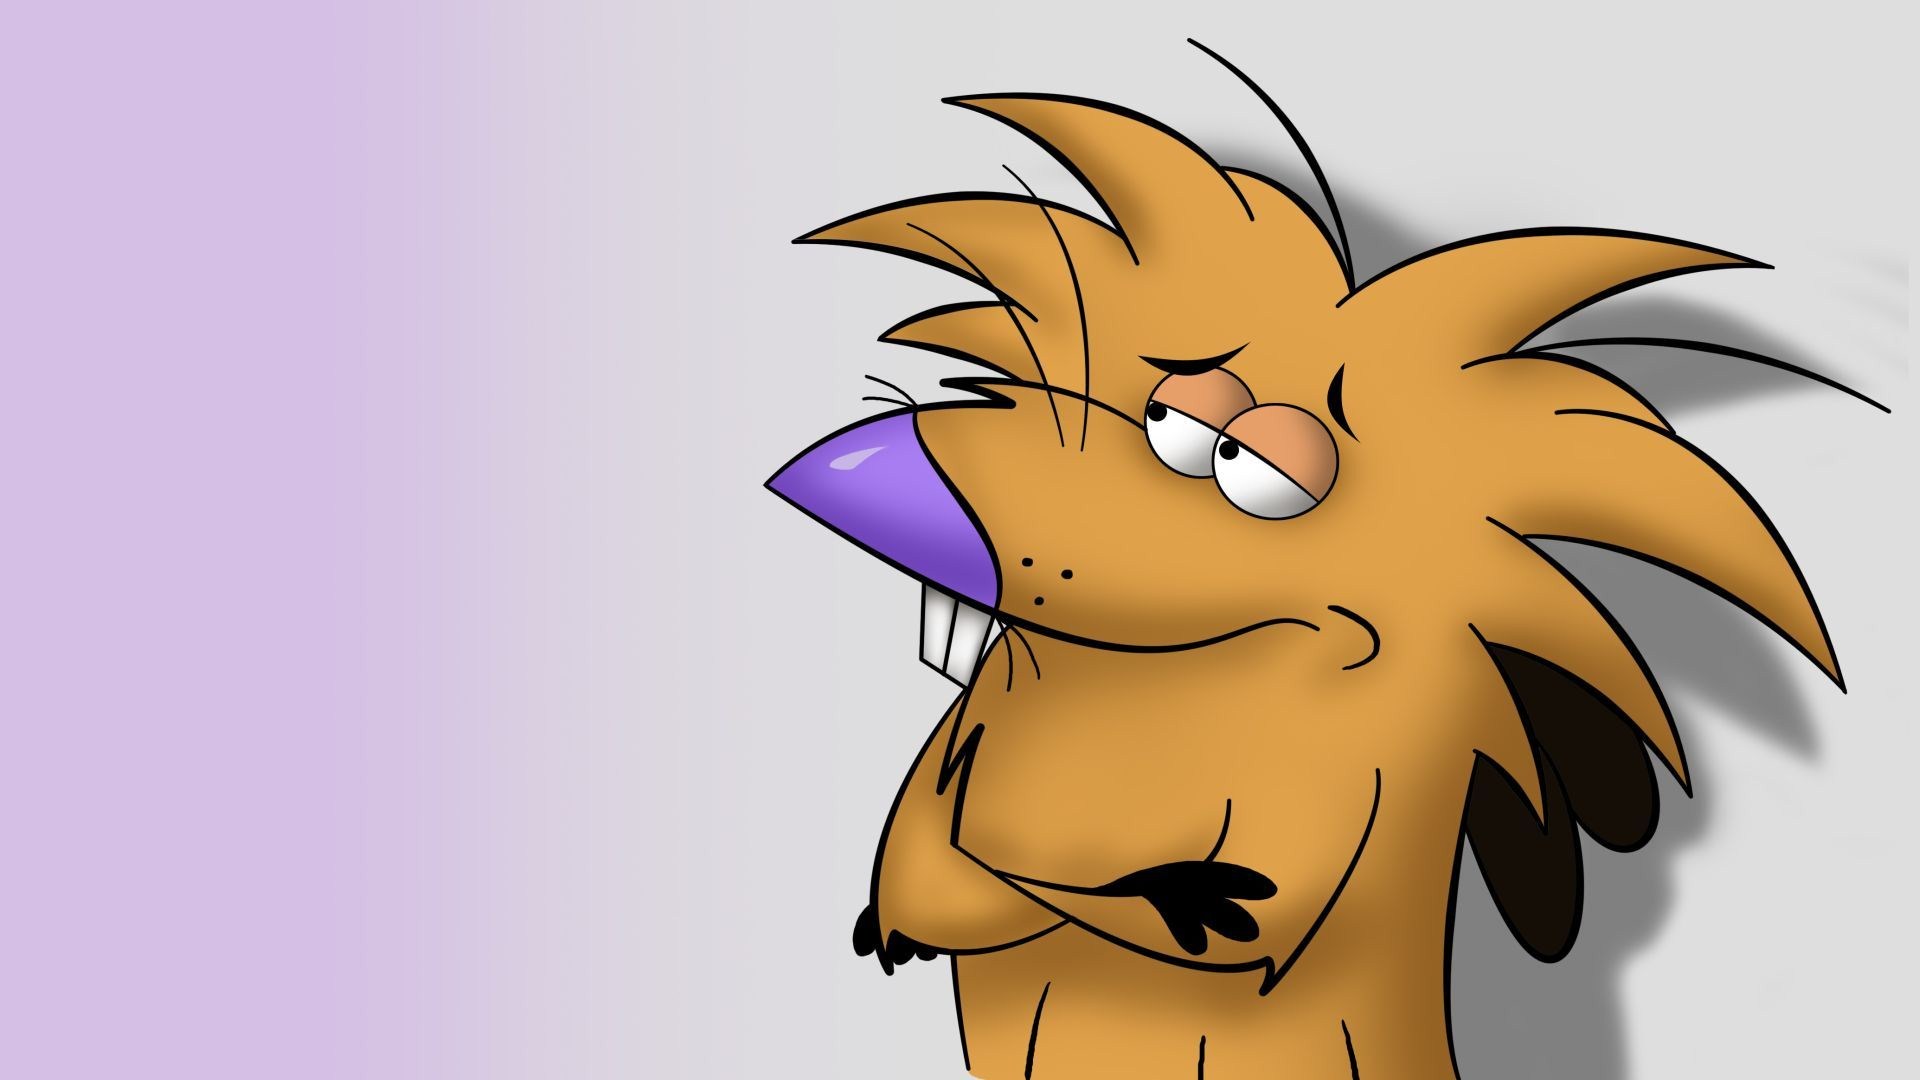 Gallery For gt Angry Beavers Wallpaper